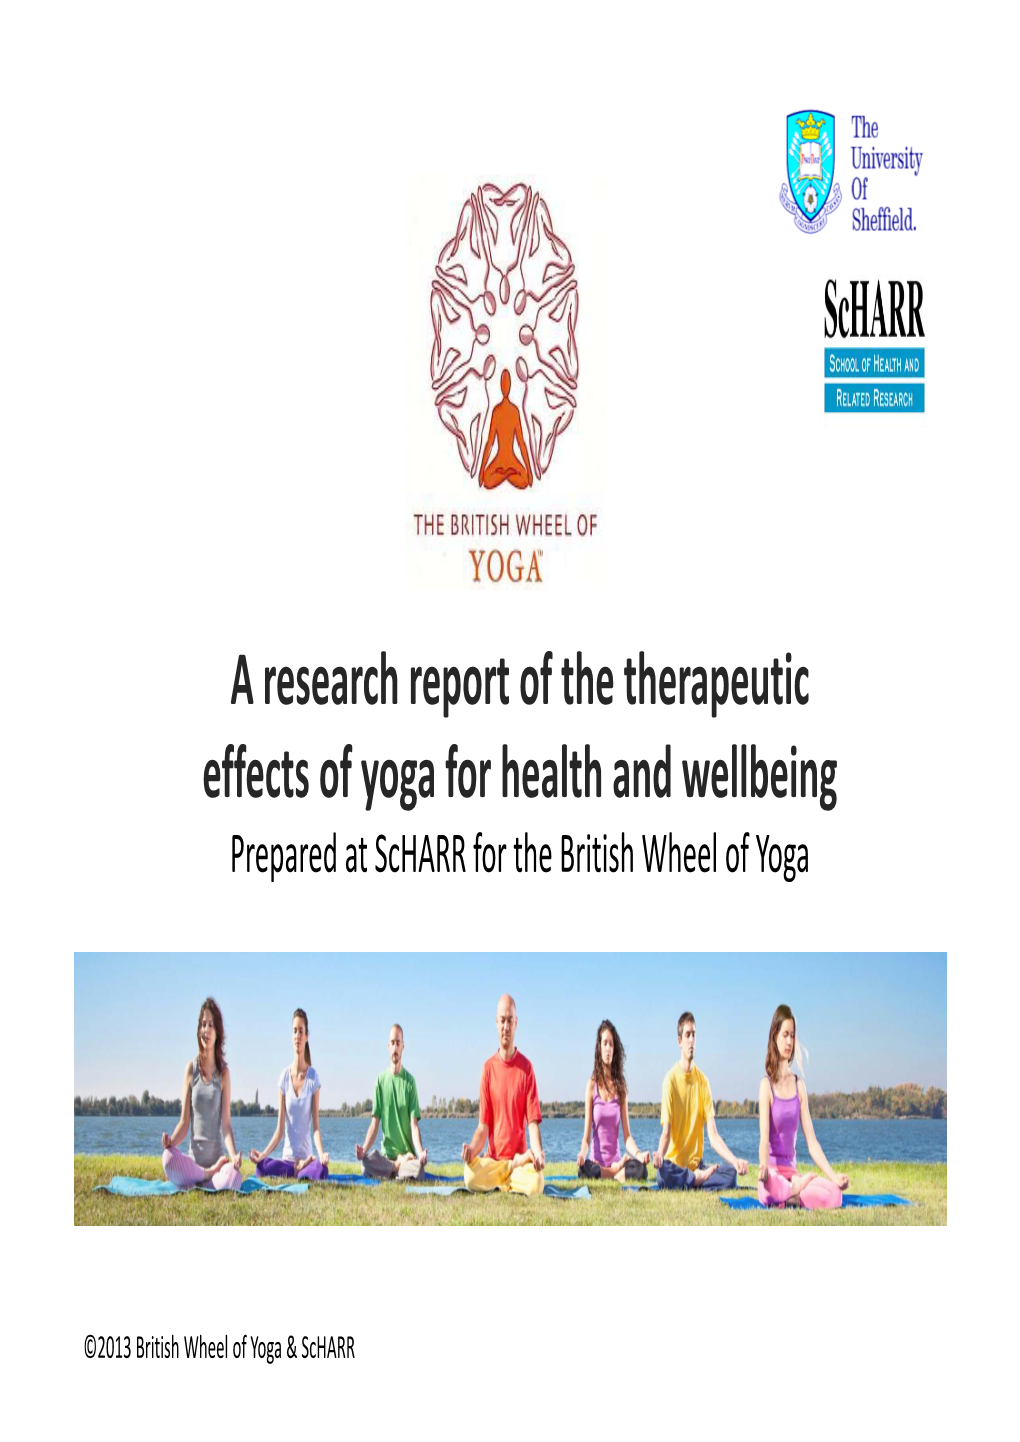 A Research Report of the Therapeutic Effects of Yoga for Health and Wellbeing Prepared at Scharr for the British Wheel of Yoga